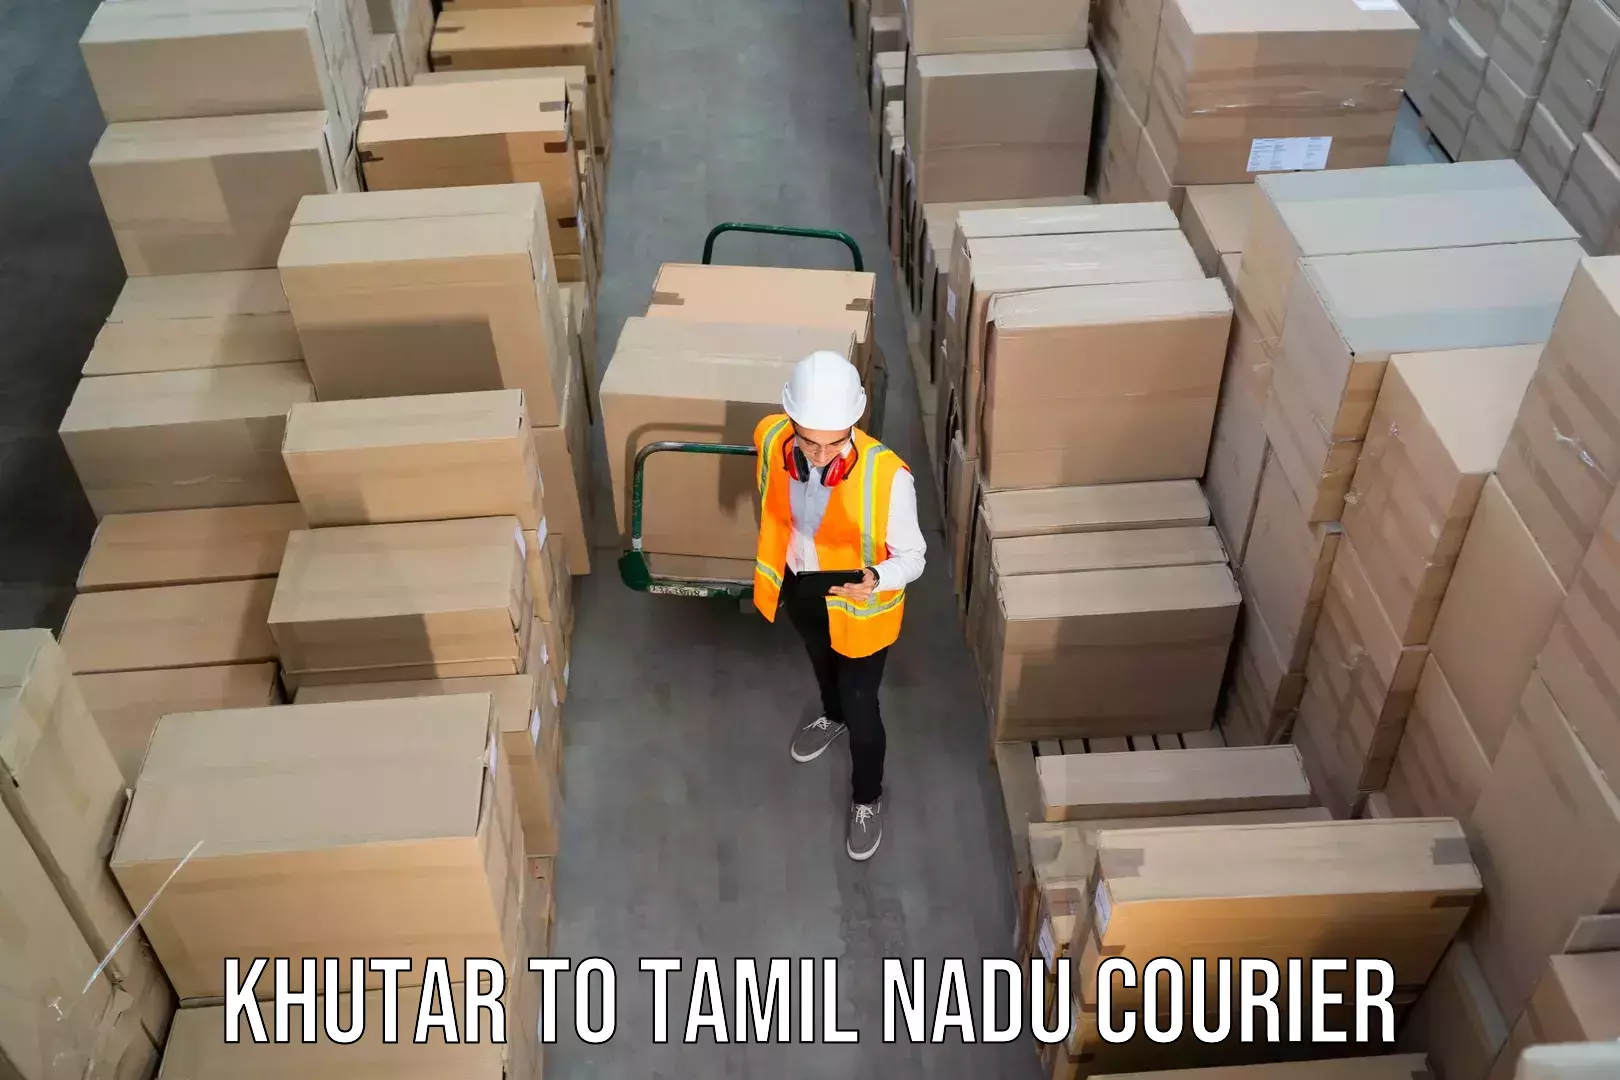 Rapid shipping services Khutar to Tamil Nadu